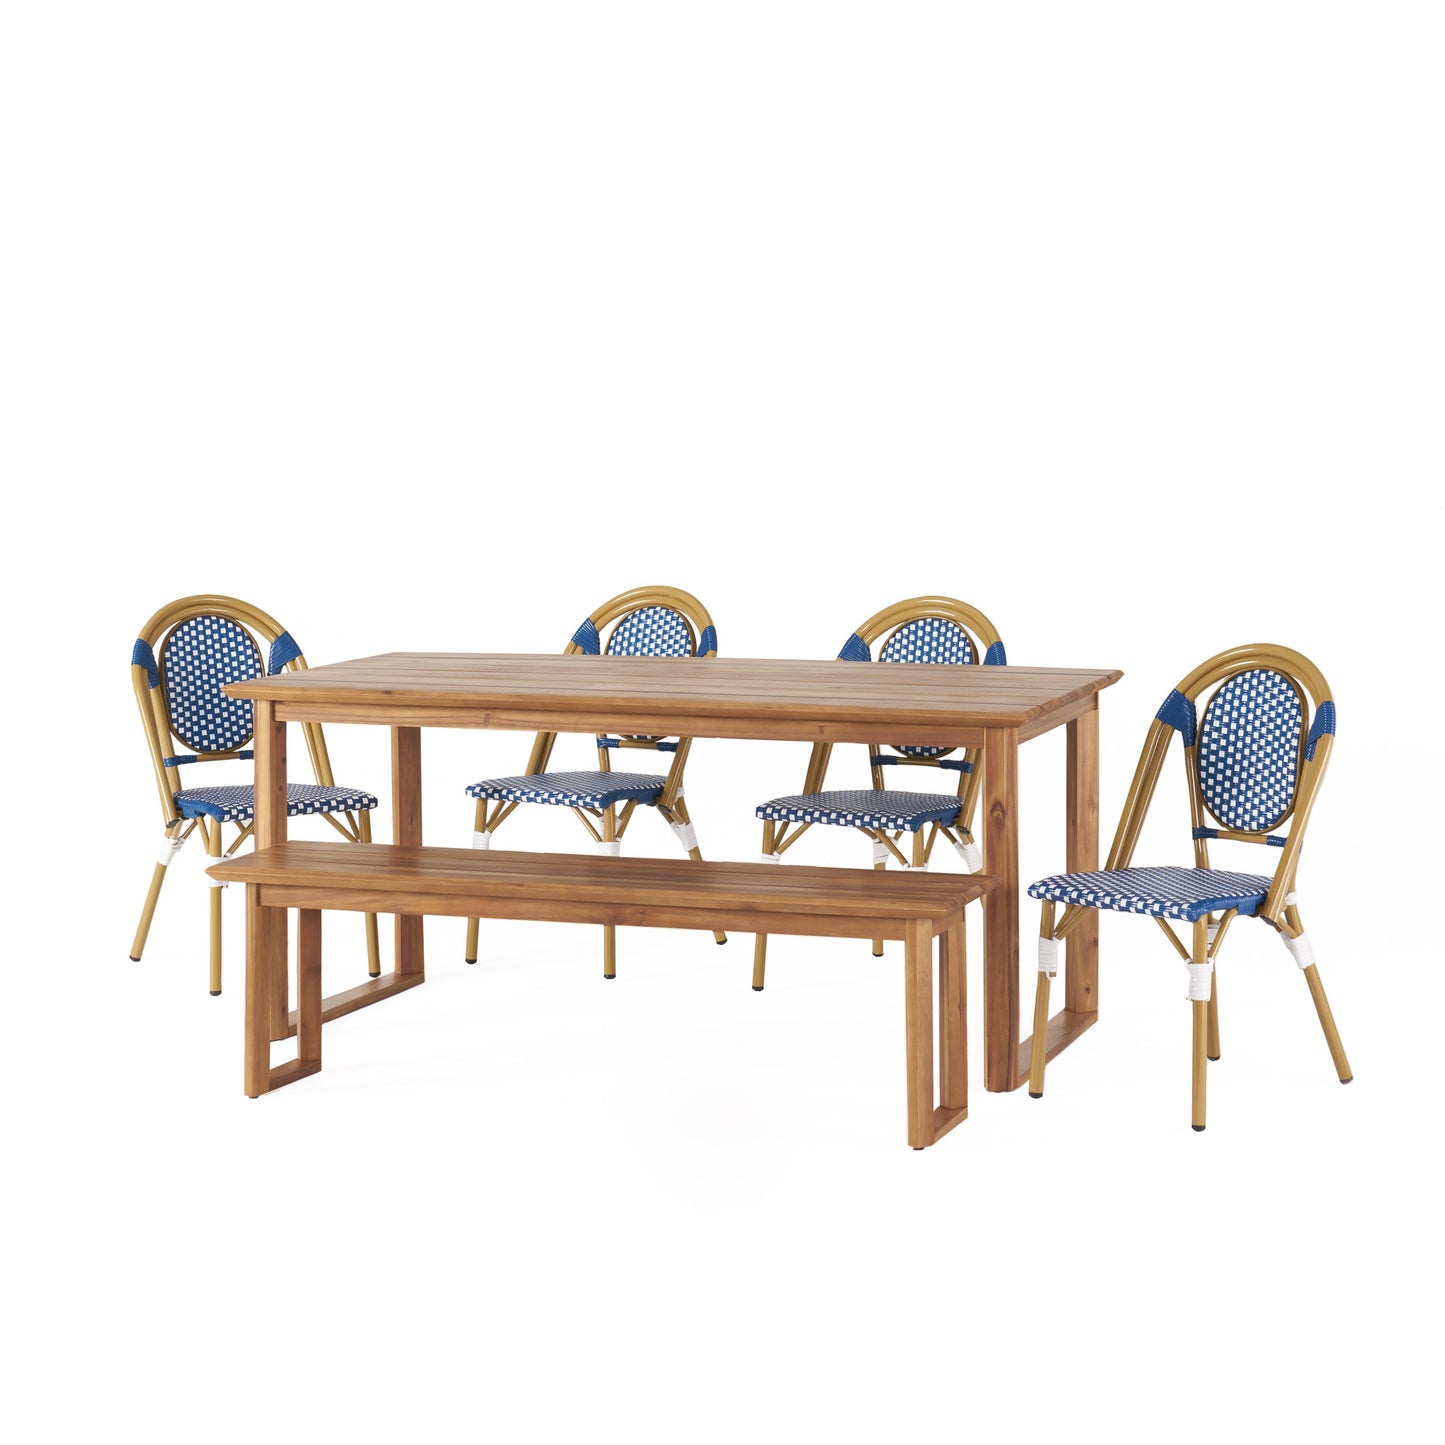 Varva Outdoor Acacia Wood and Wicker 6 Piece Dining Set with Bench